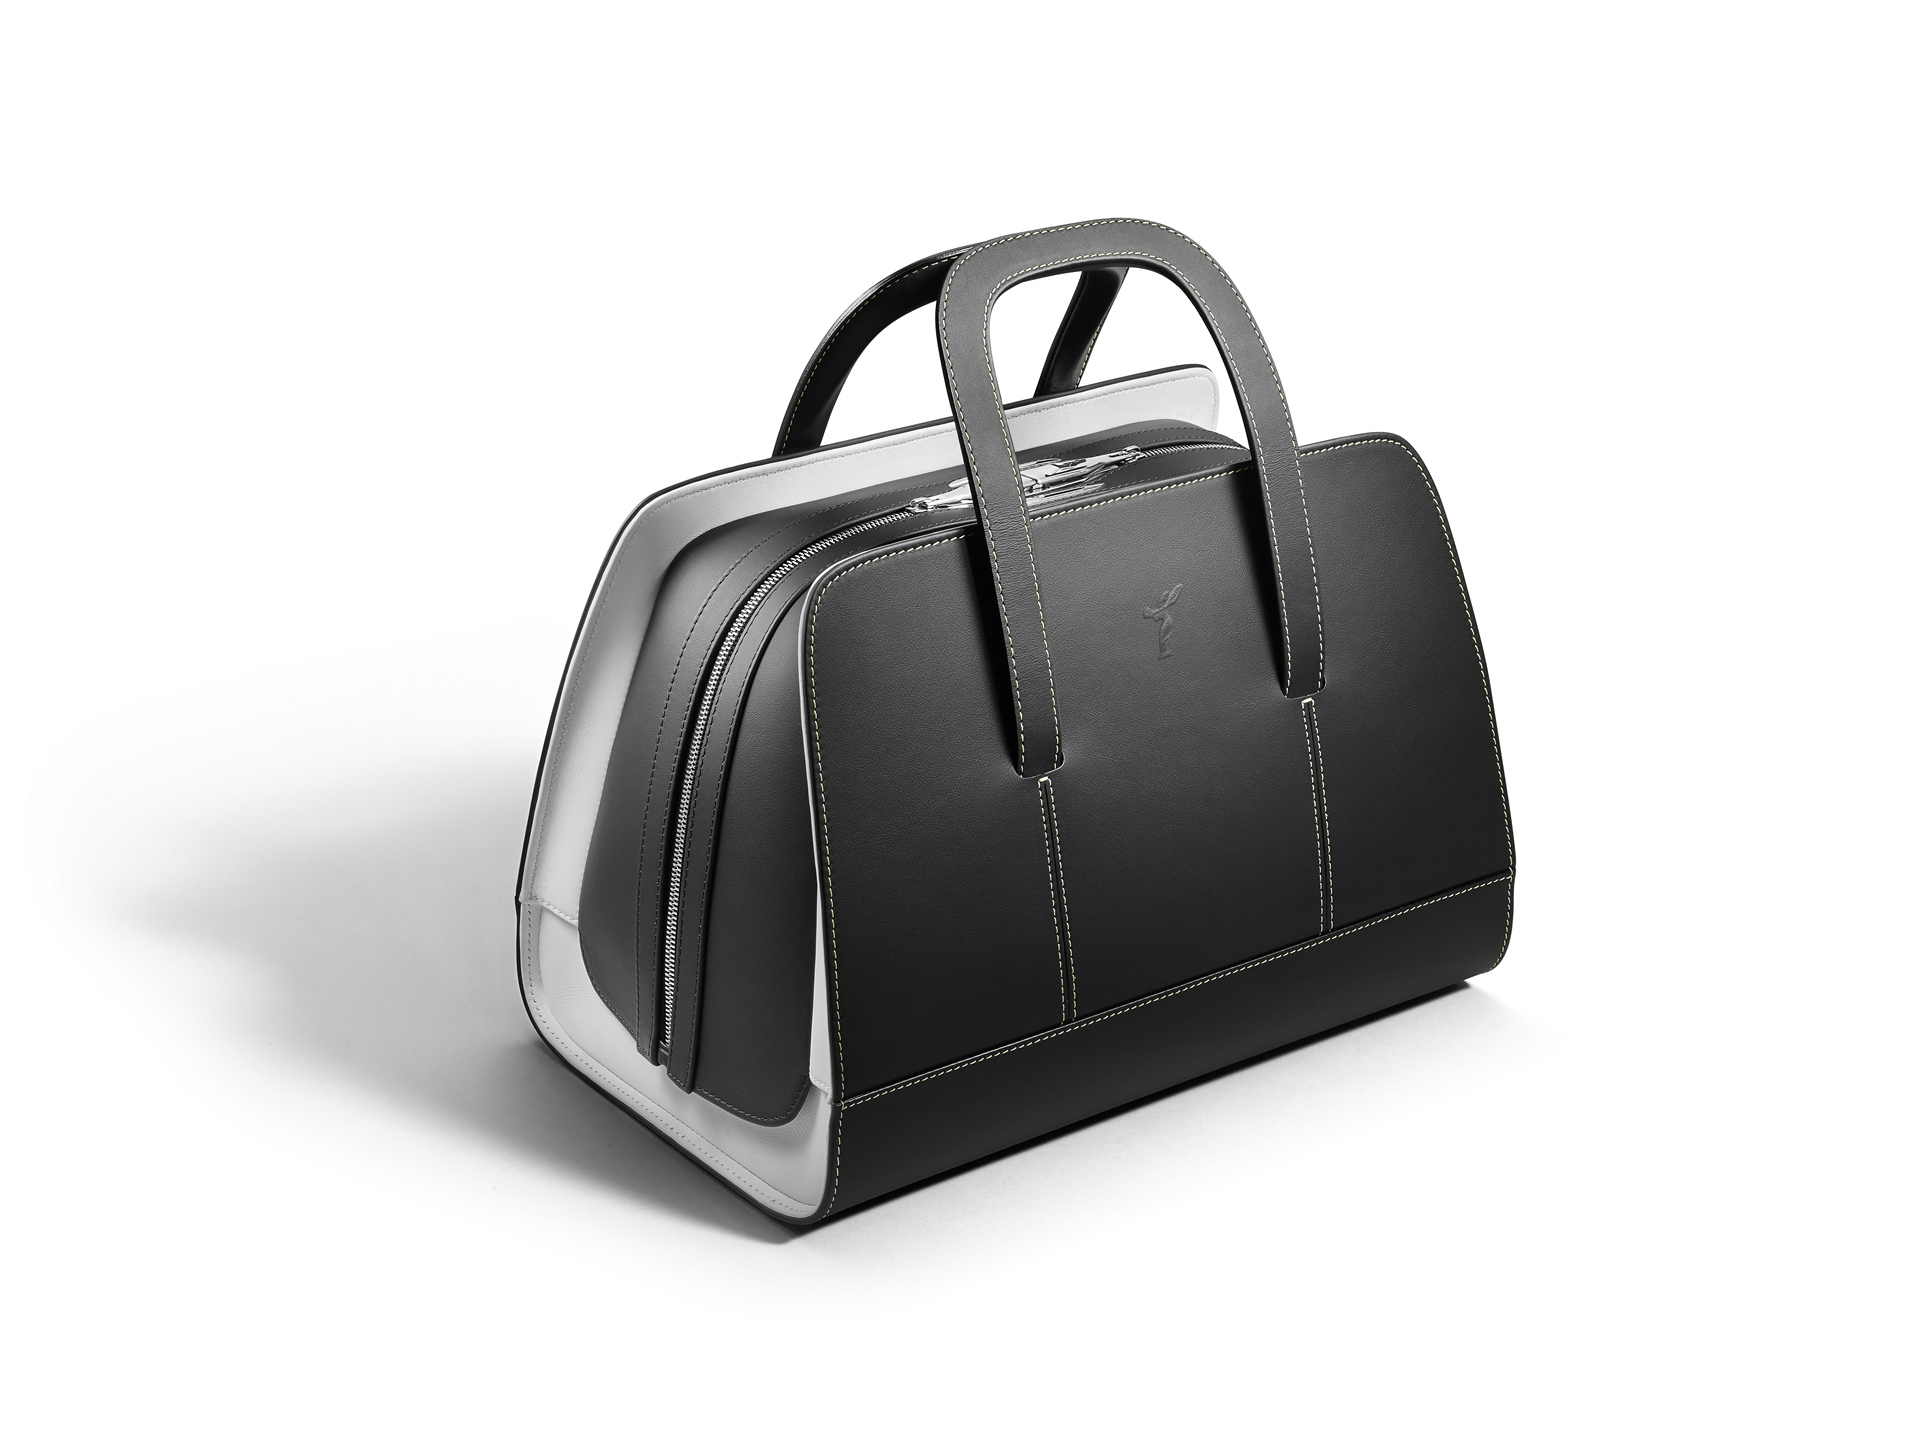 Wraith Luggage Collection Demonstrates the Art of True Luxury Conveyance © BMW AG